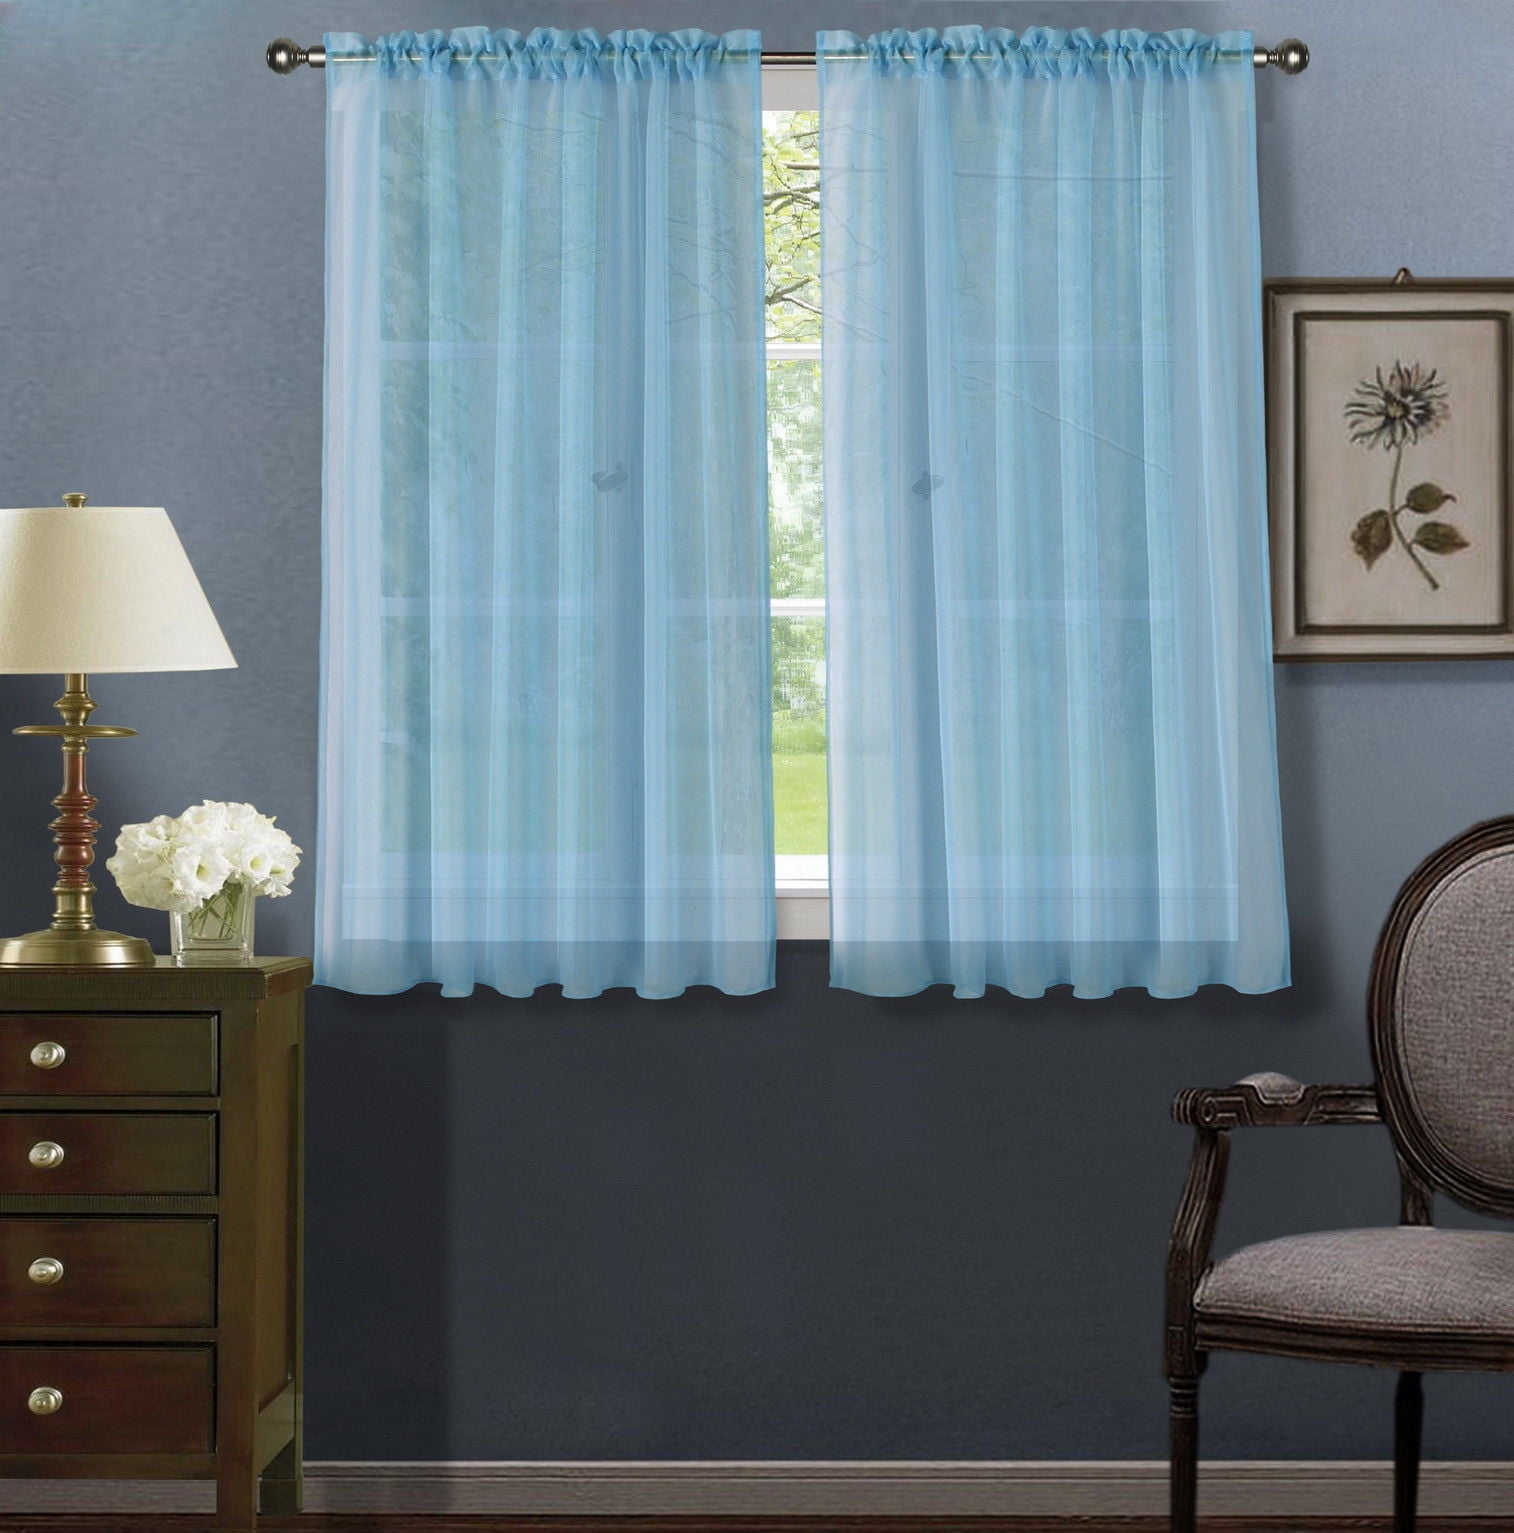 light blue curtains 34.5 by 64